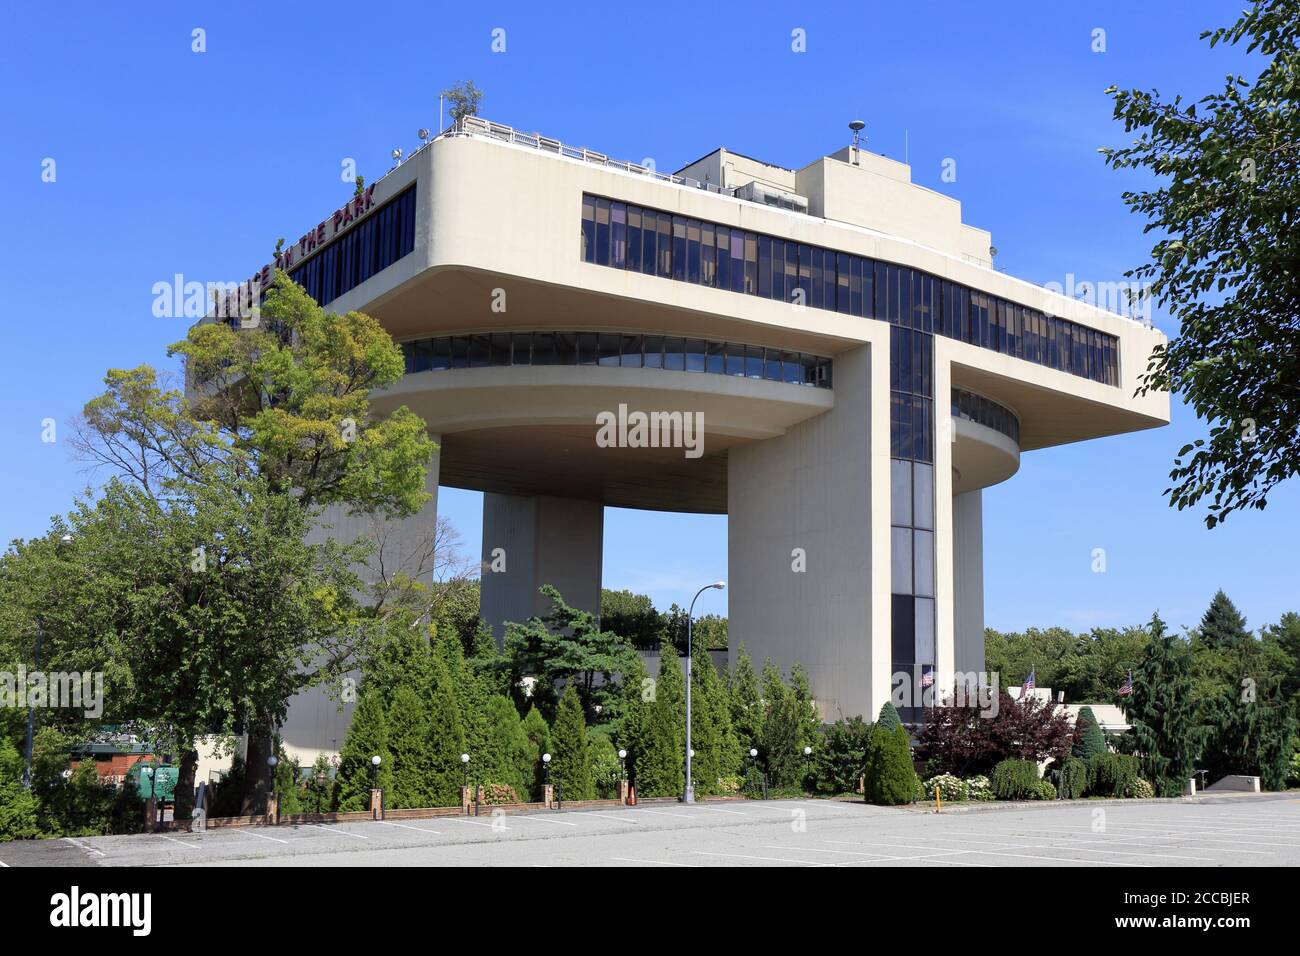 Terrace On The Park, 52-11 111th Street, Queens, New York. exterior of a banquet hall former 1964 New York World's Fair heliport at Flushing Meadows Stock Photo